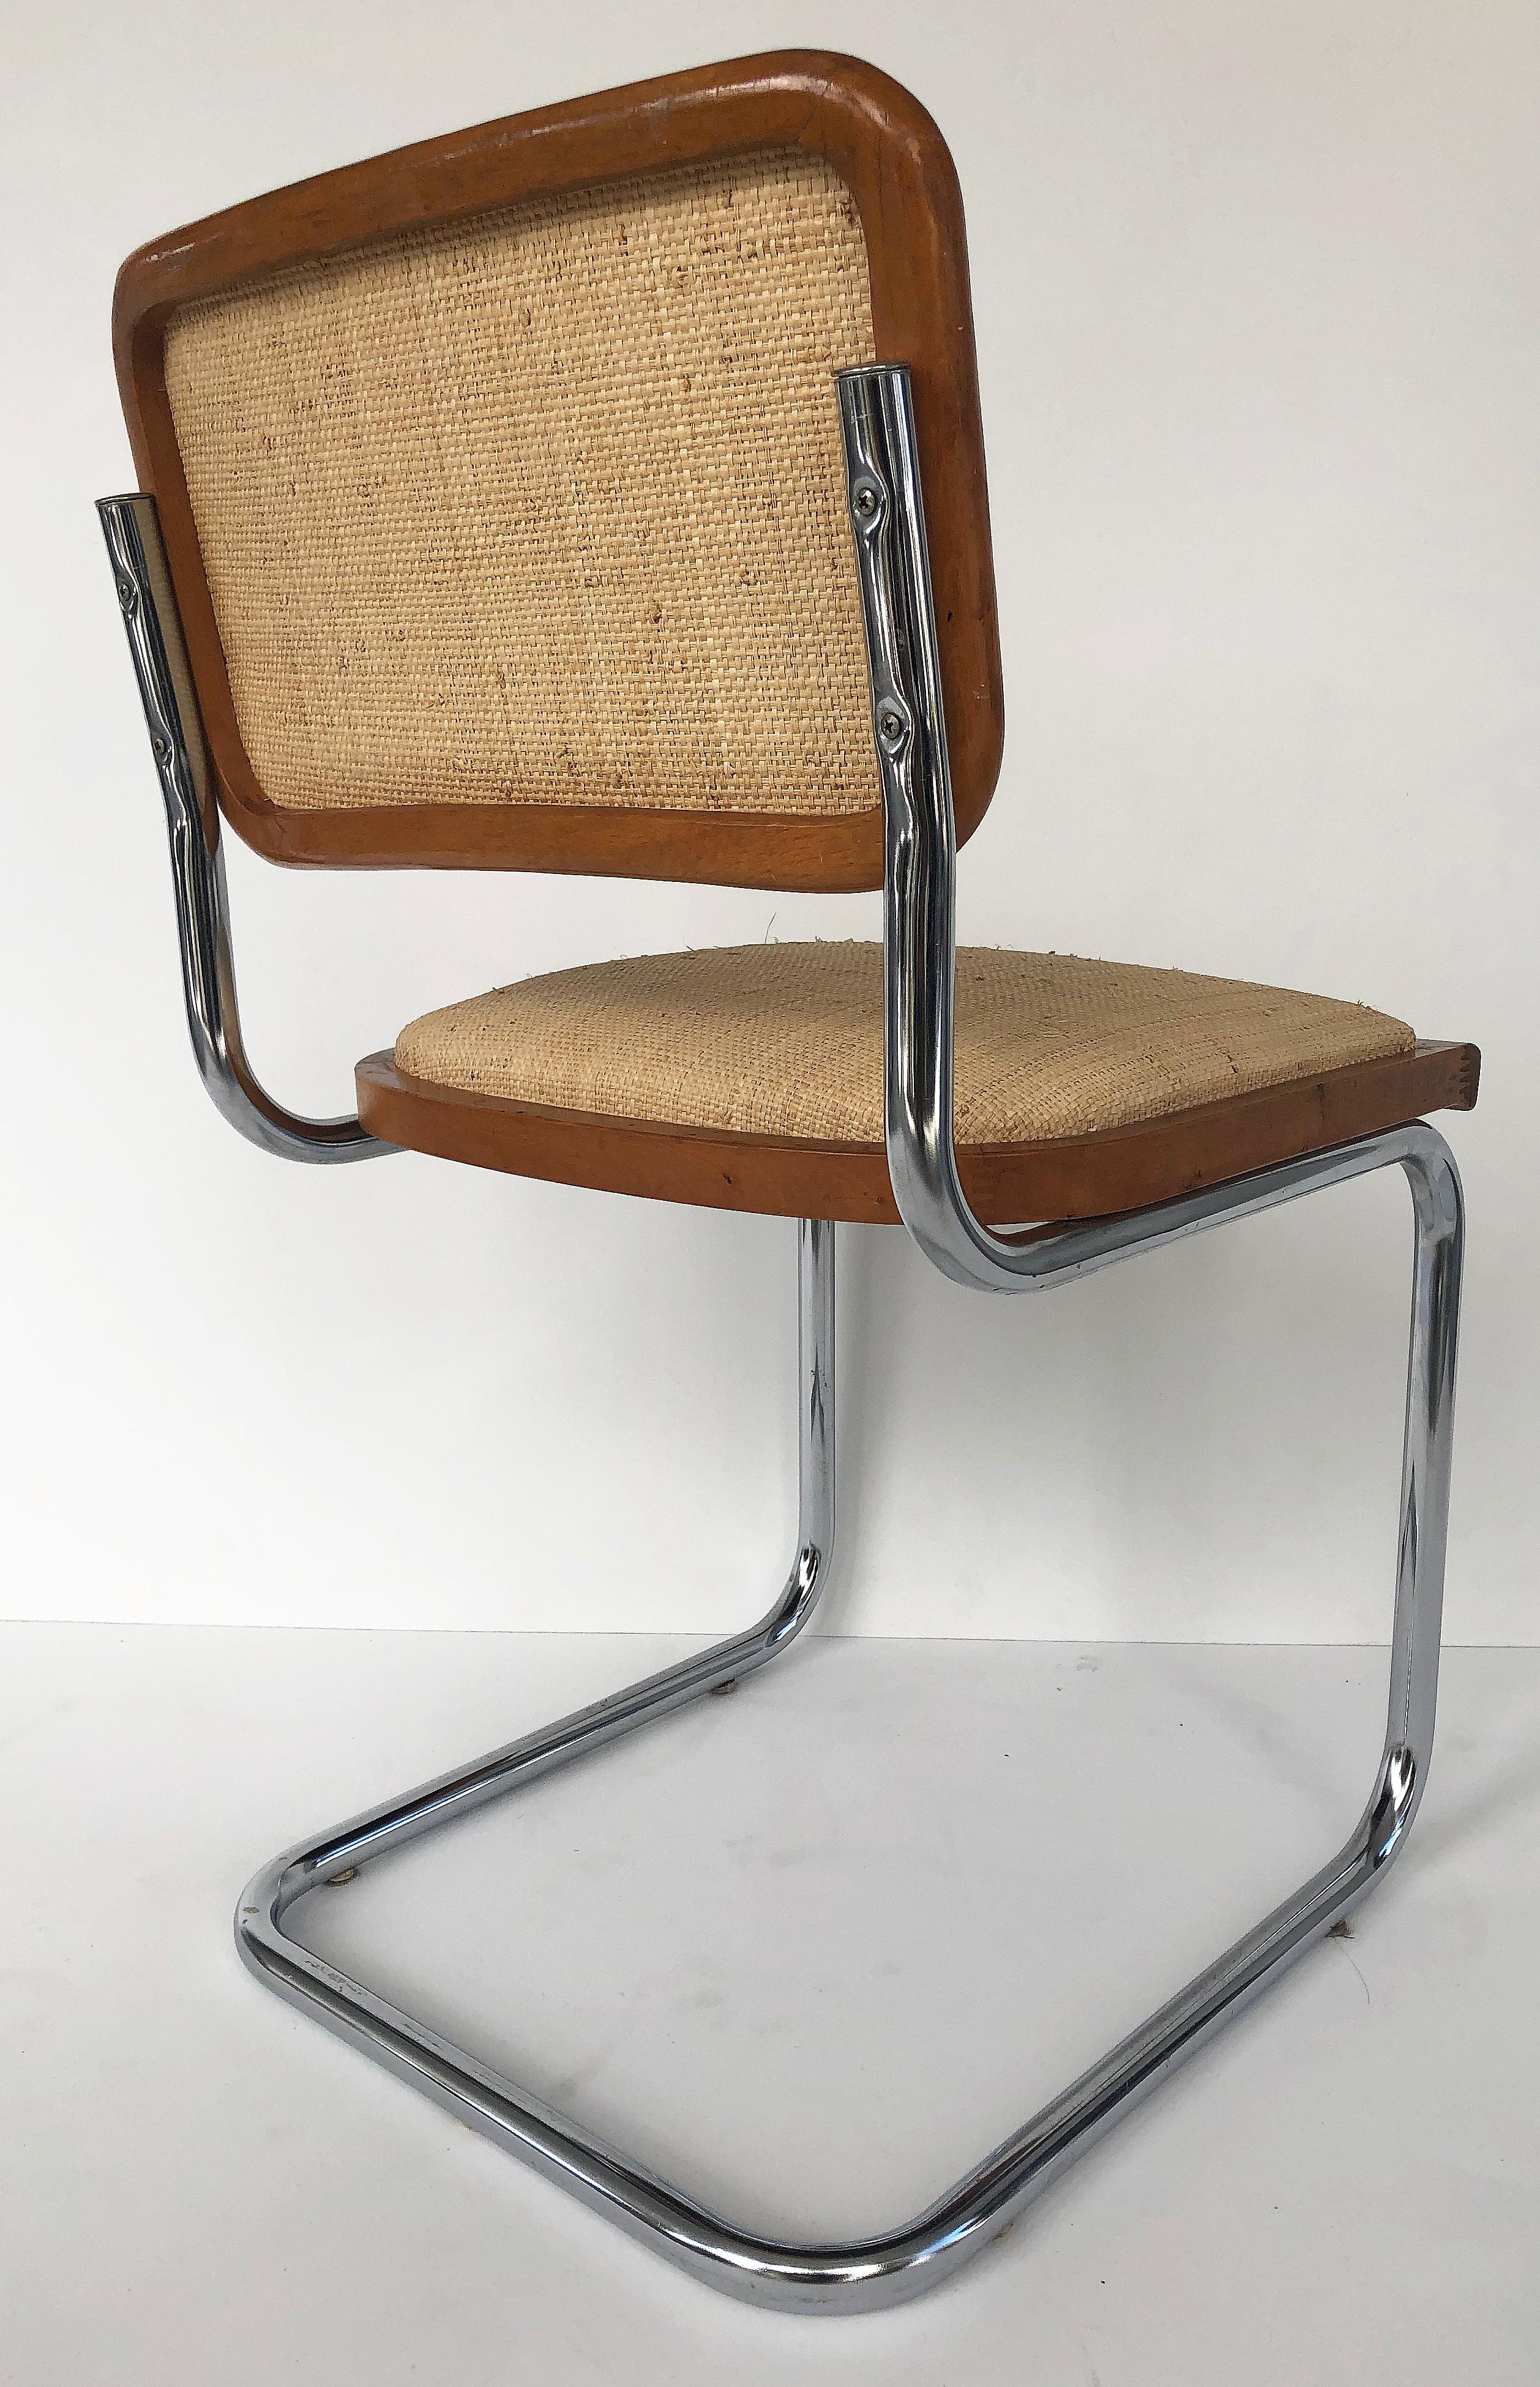 Marcel Breuer Knoll Chrome Cesca Chairs Upholstered in Raffia, Set of Four 1